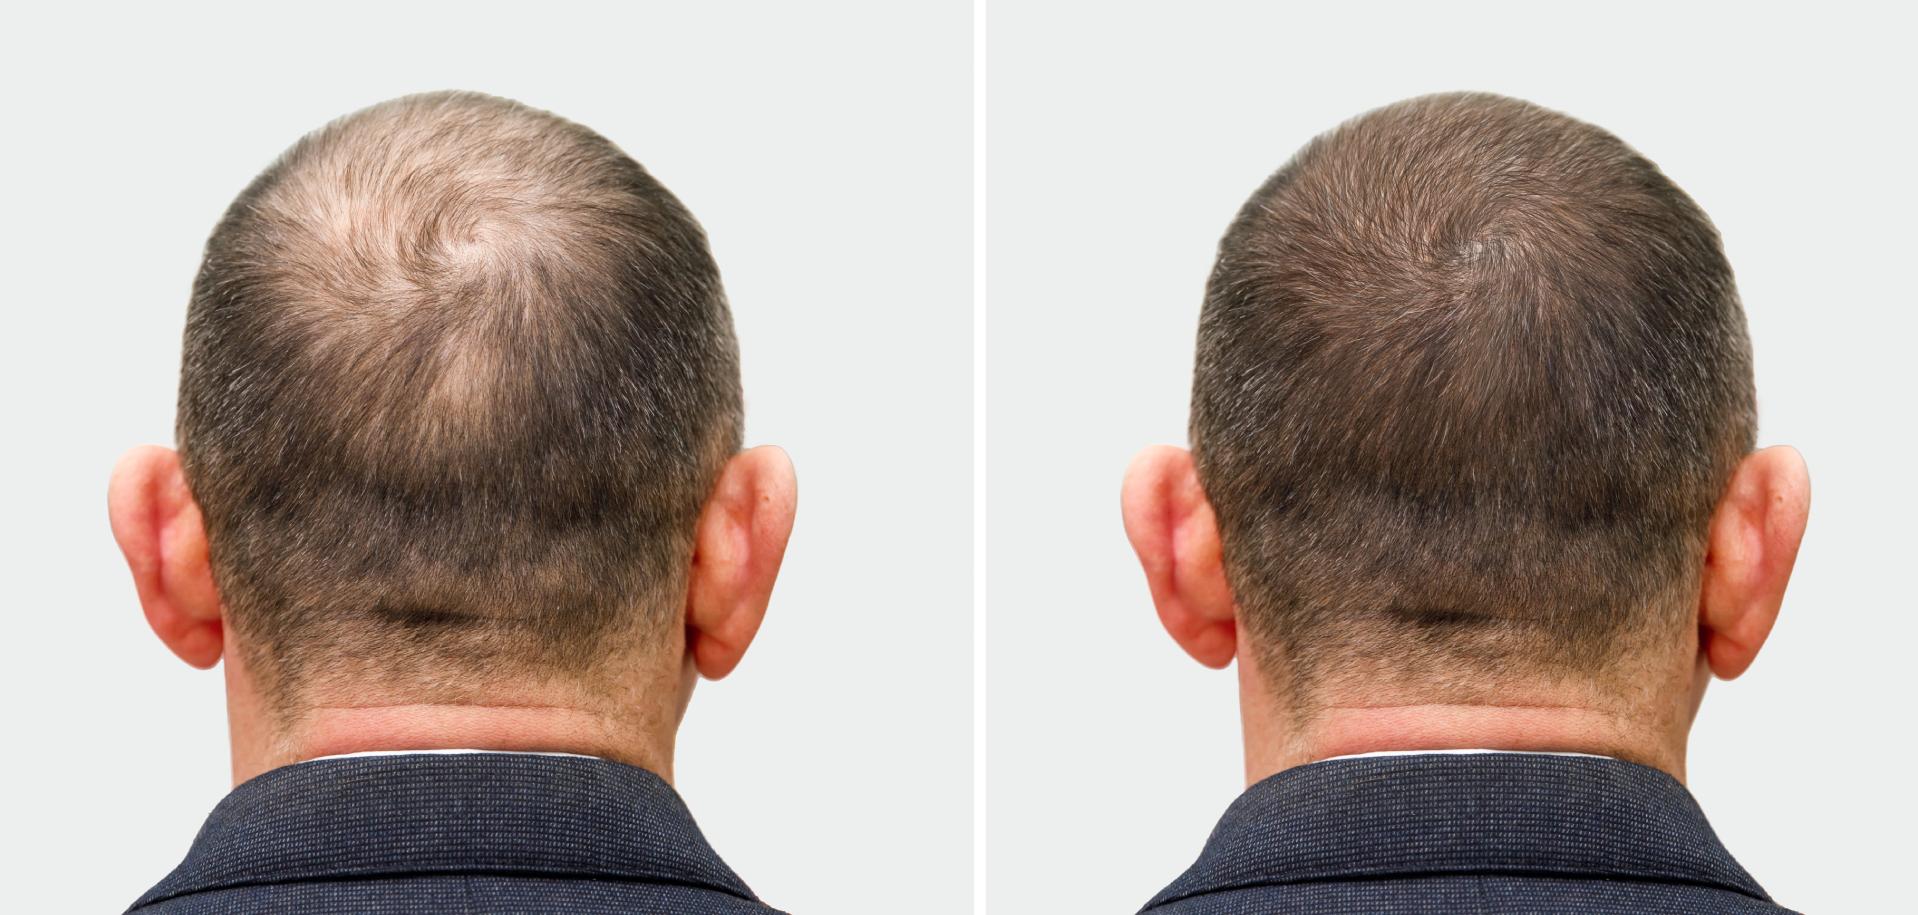 the head of a man before and after hair transplant surgery